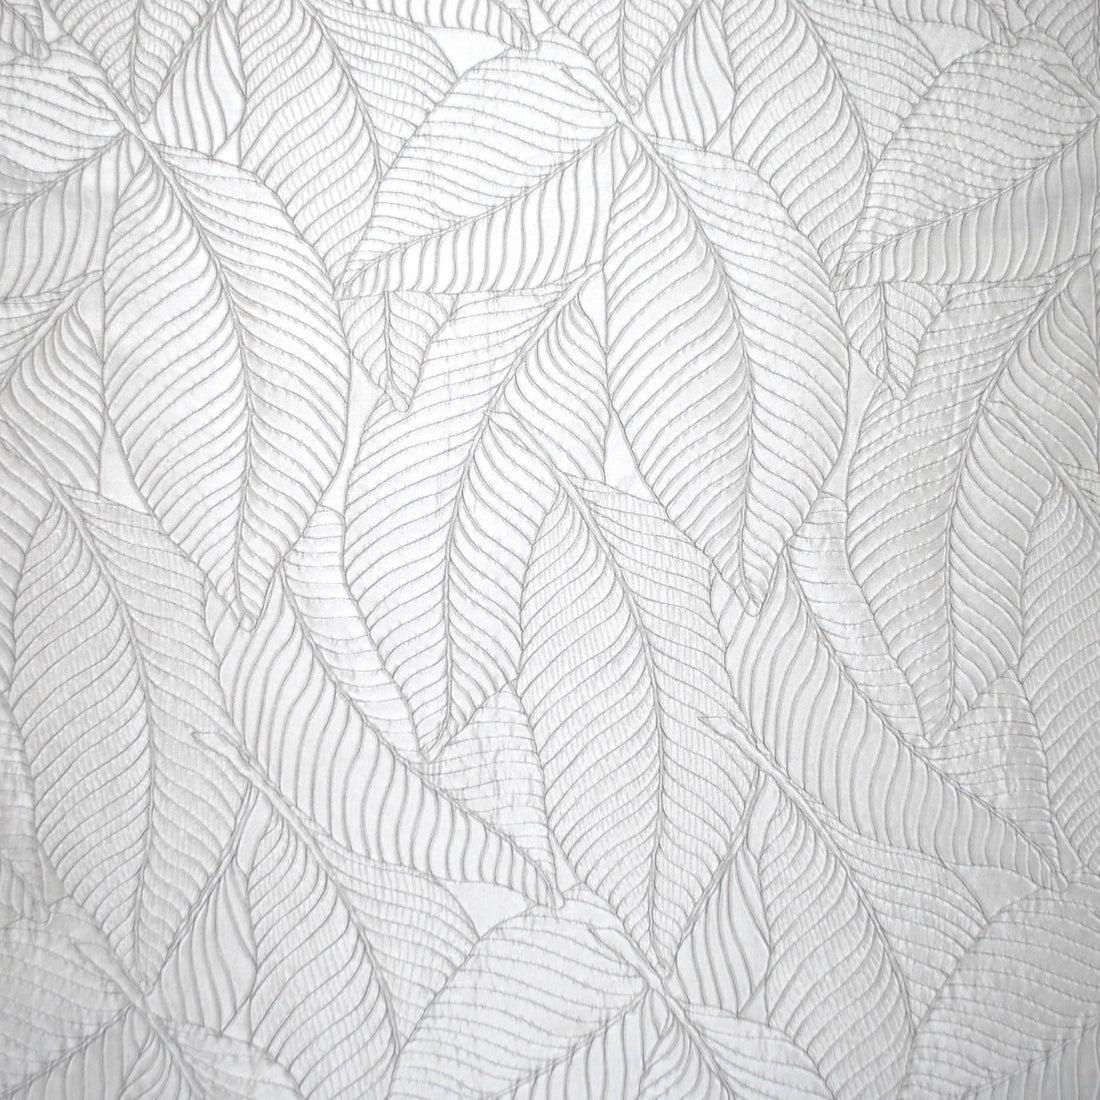 Sagamore Hill fabric in platinum color - pattern number S7 0002DRYL - by Scalamandre in the Old World Weavers collection